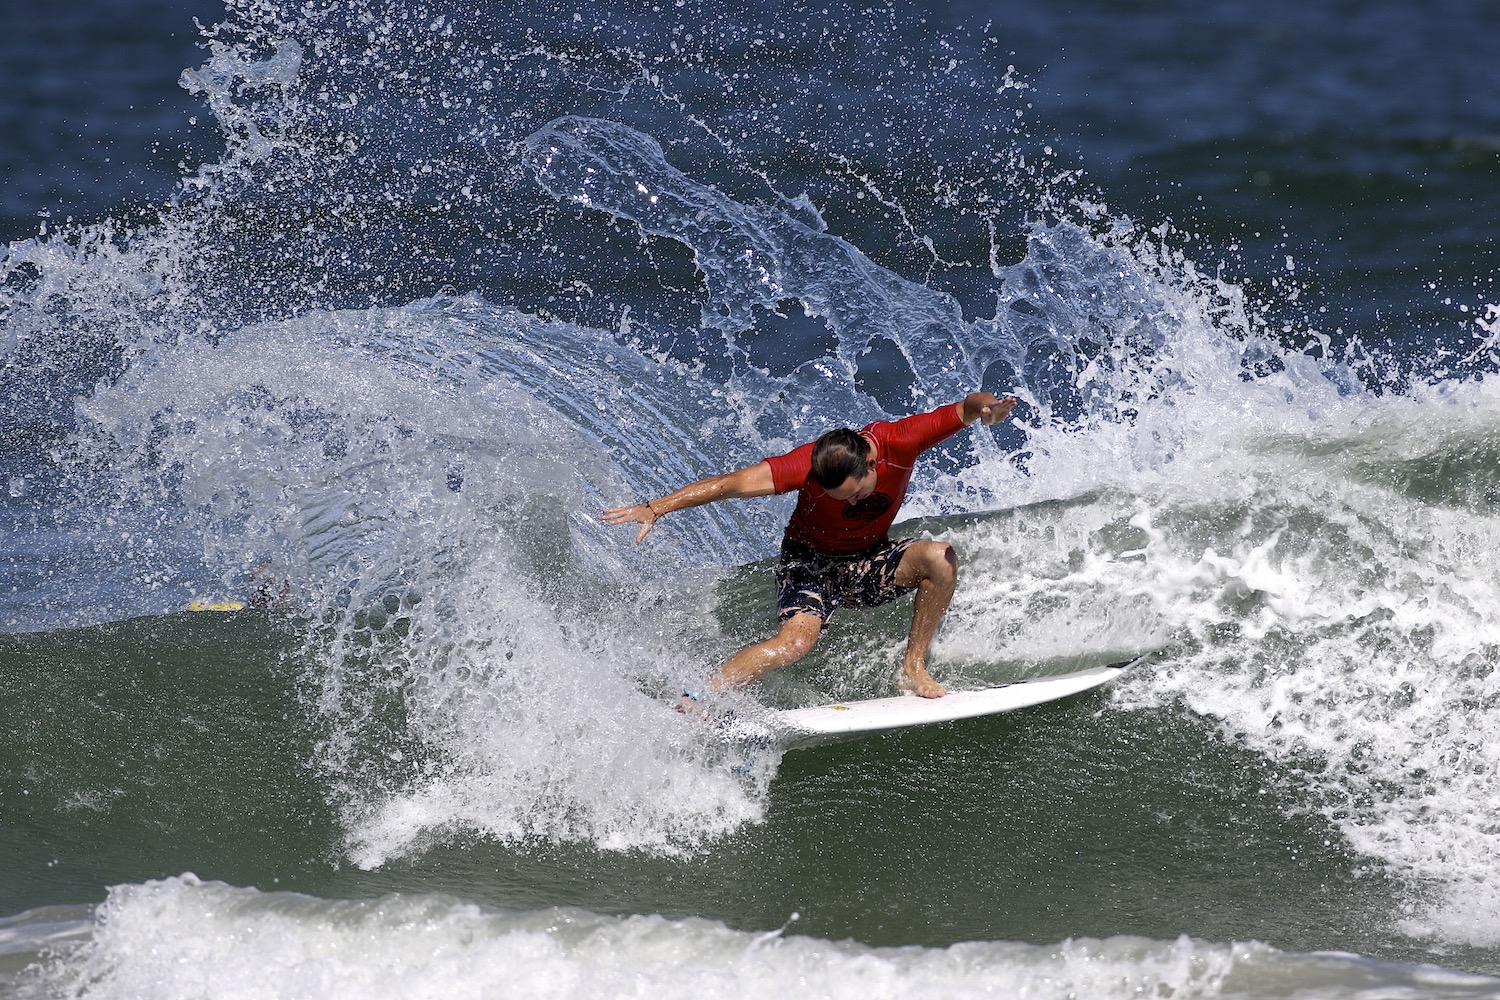 The Eco Pro Surf Series is back with an exciting 4 event season ahead!